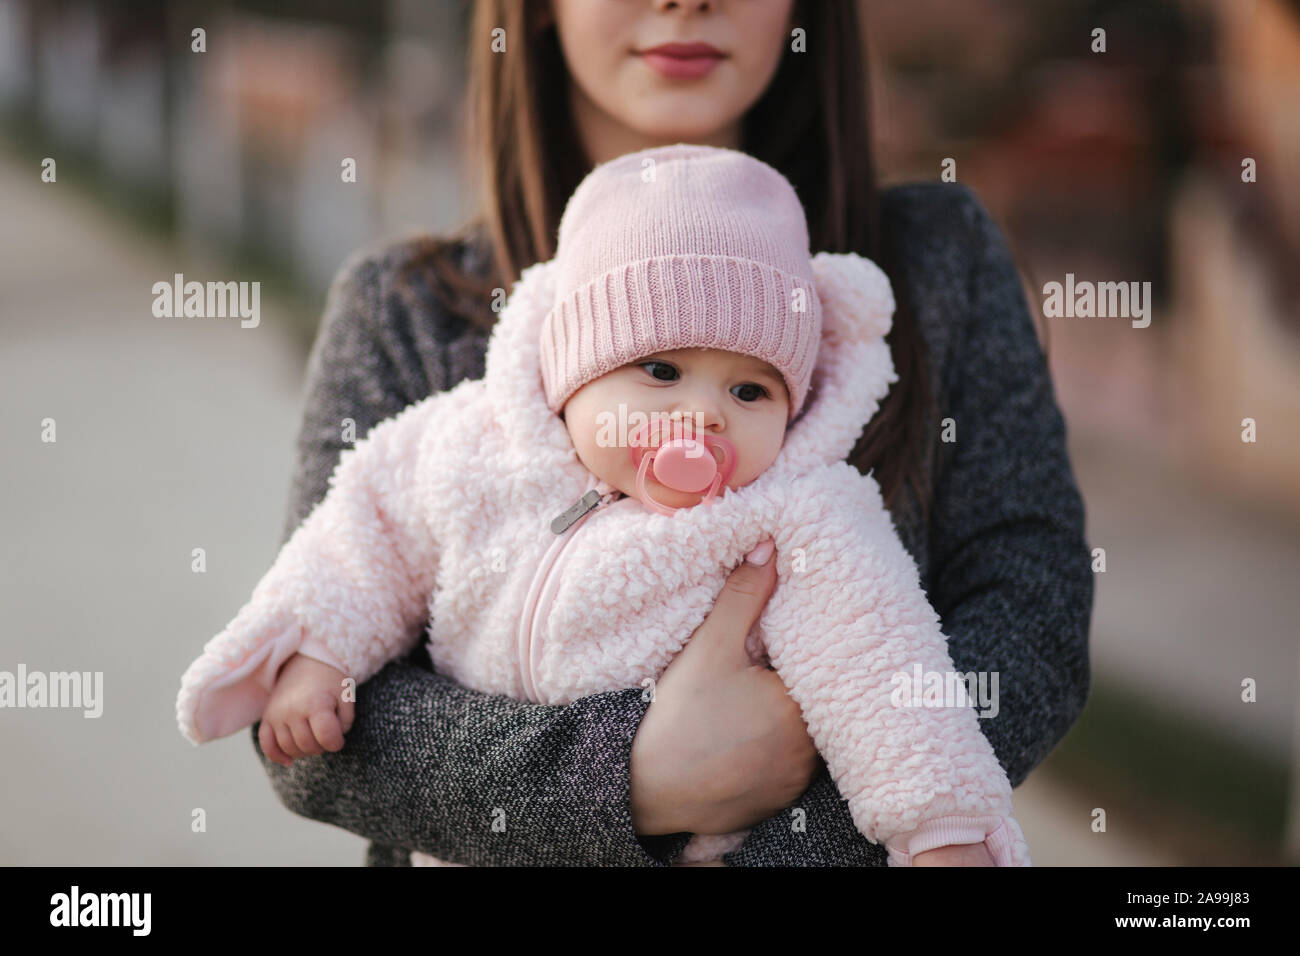 Little baby girl on mother's hands in pink clothes. Cute baby with ...